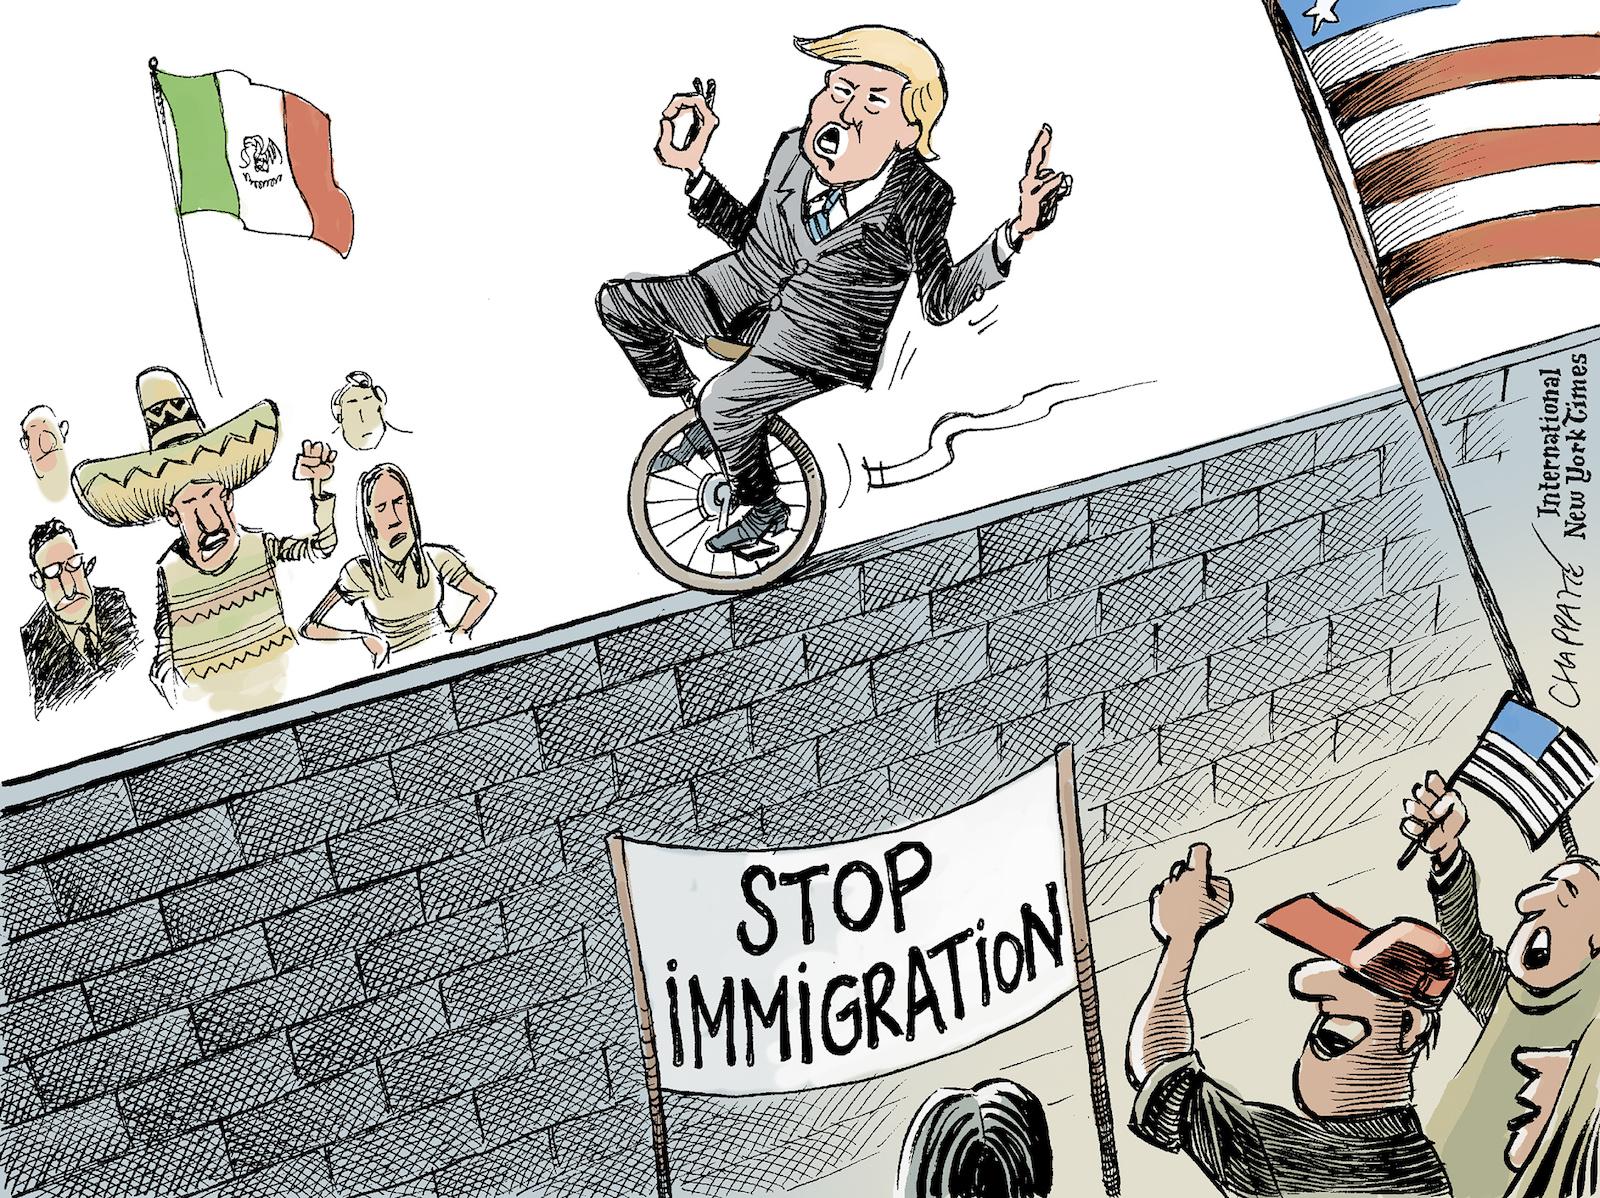 Trump's immigration policy